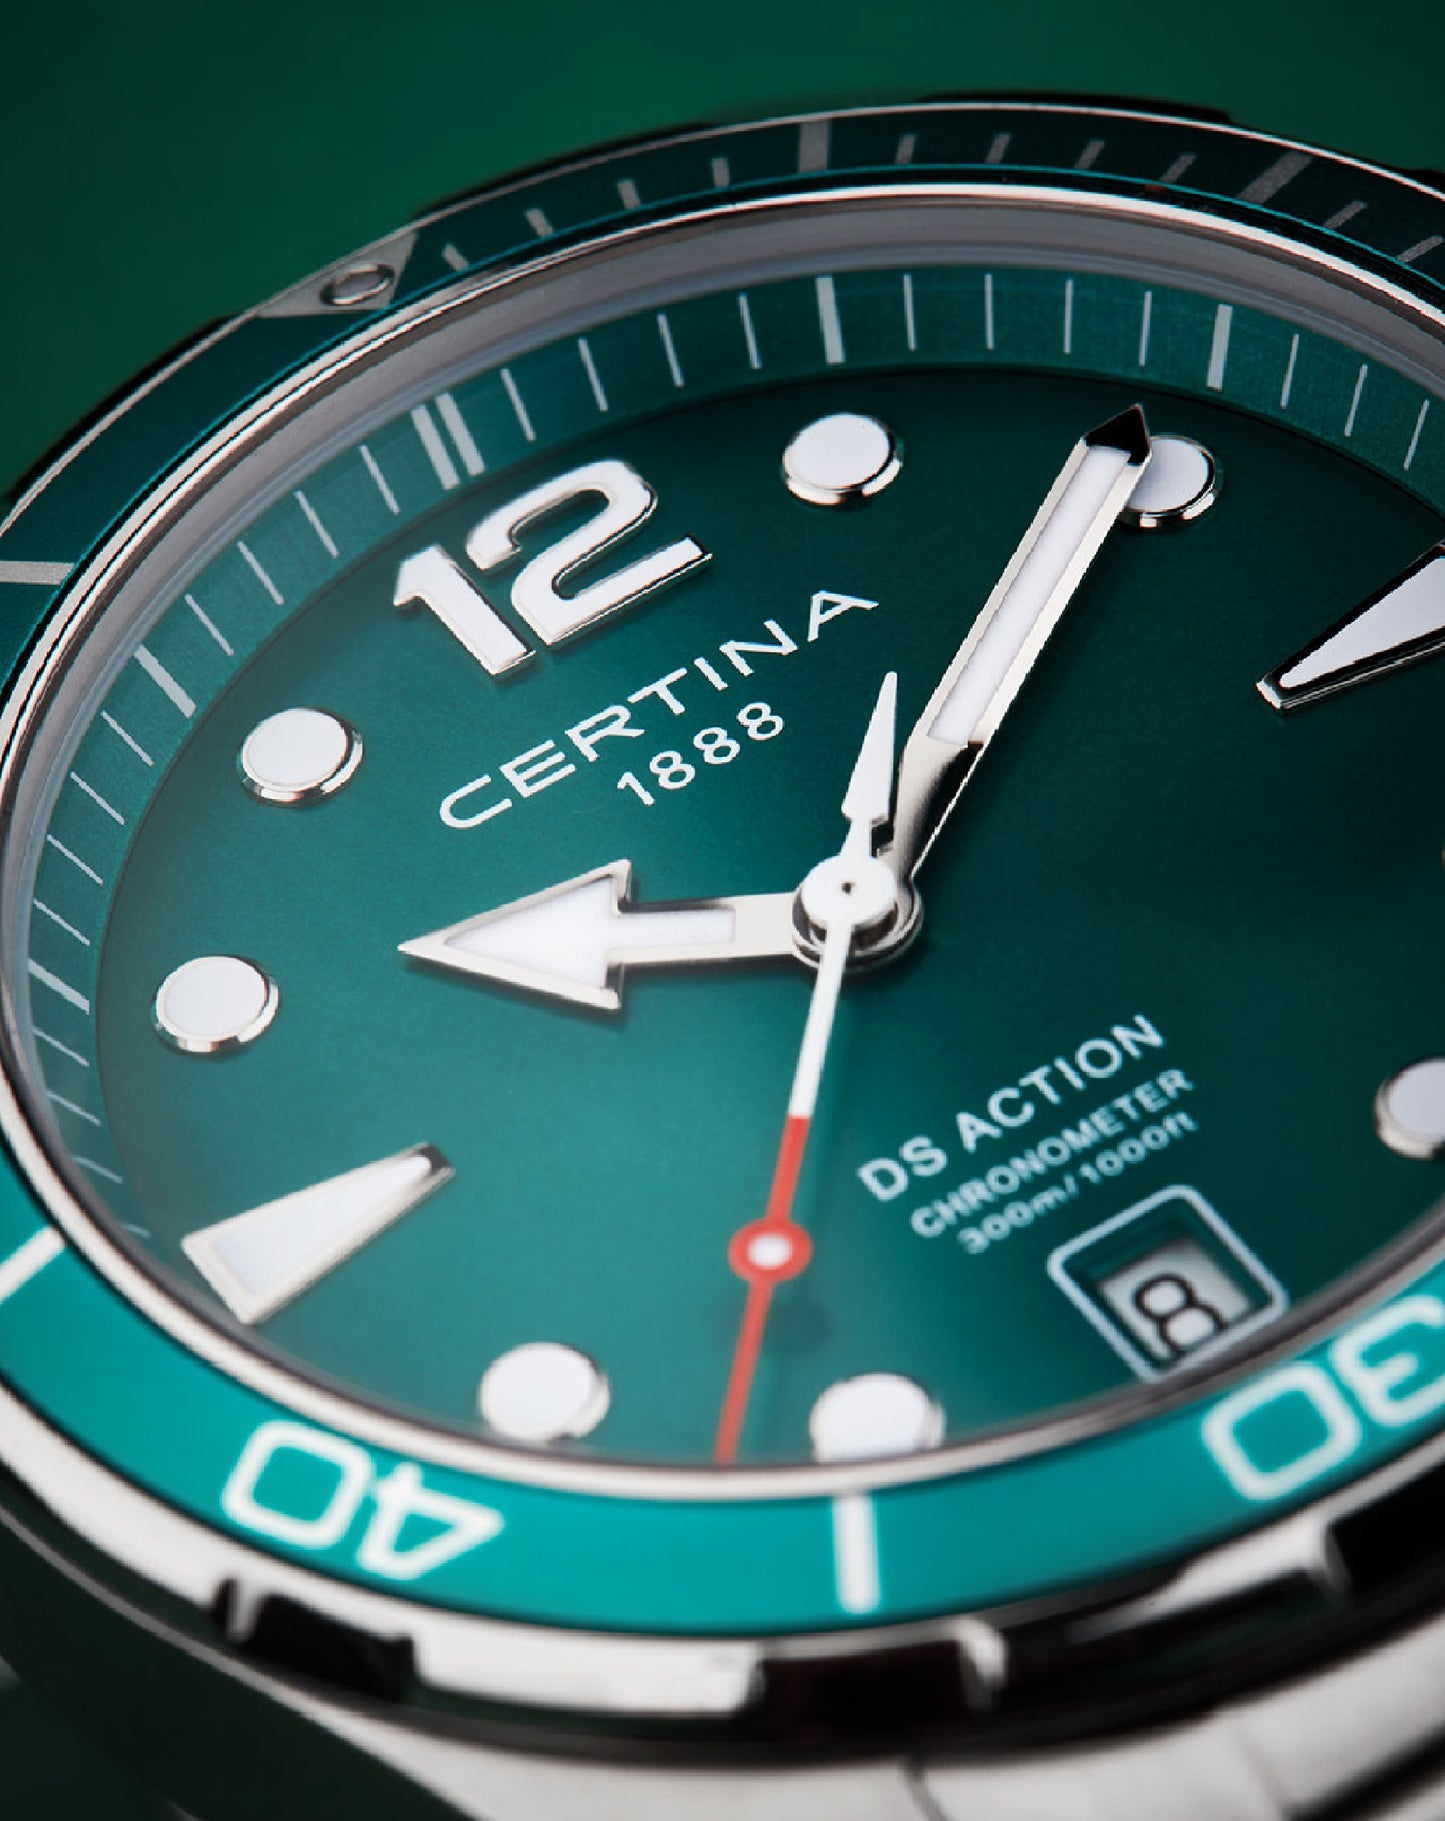 Certina Certina DS Action Diver GREEN DIAL 43MM Watch